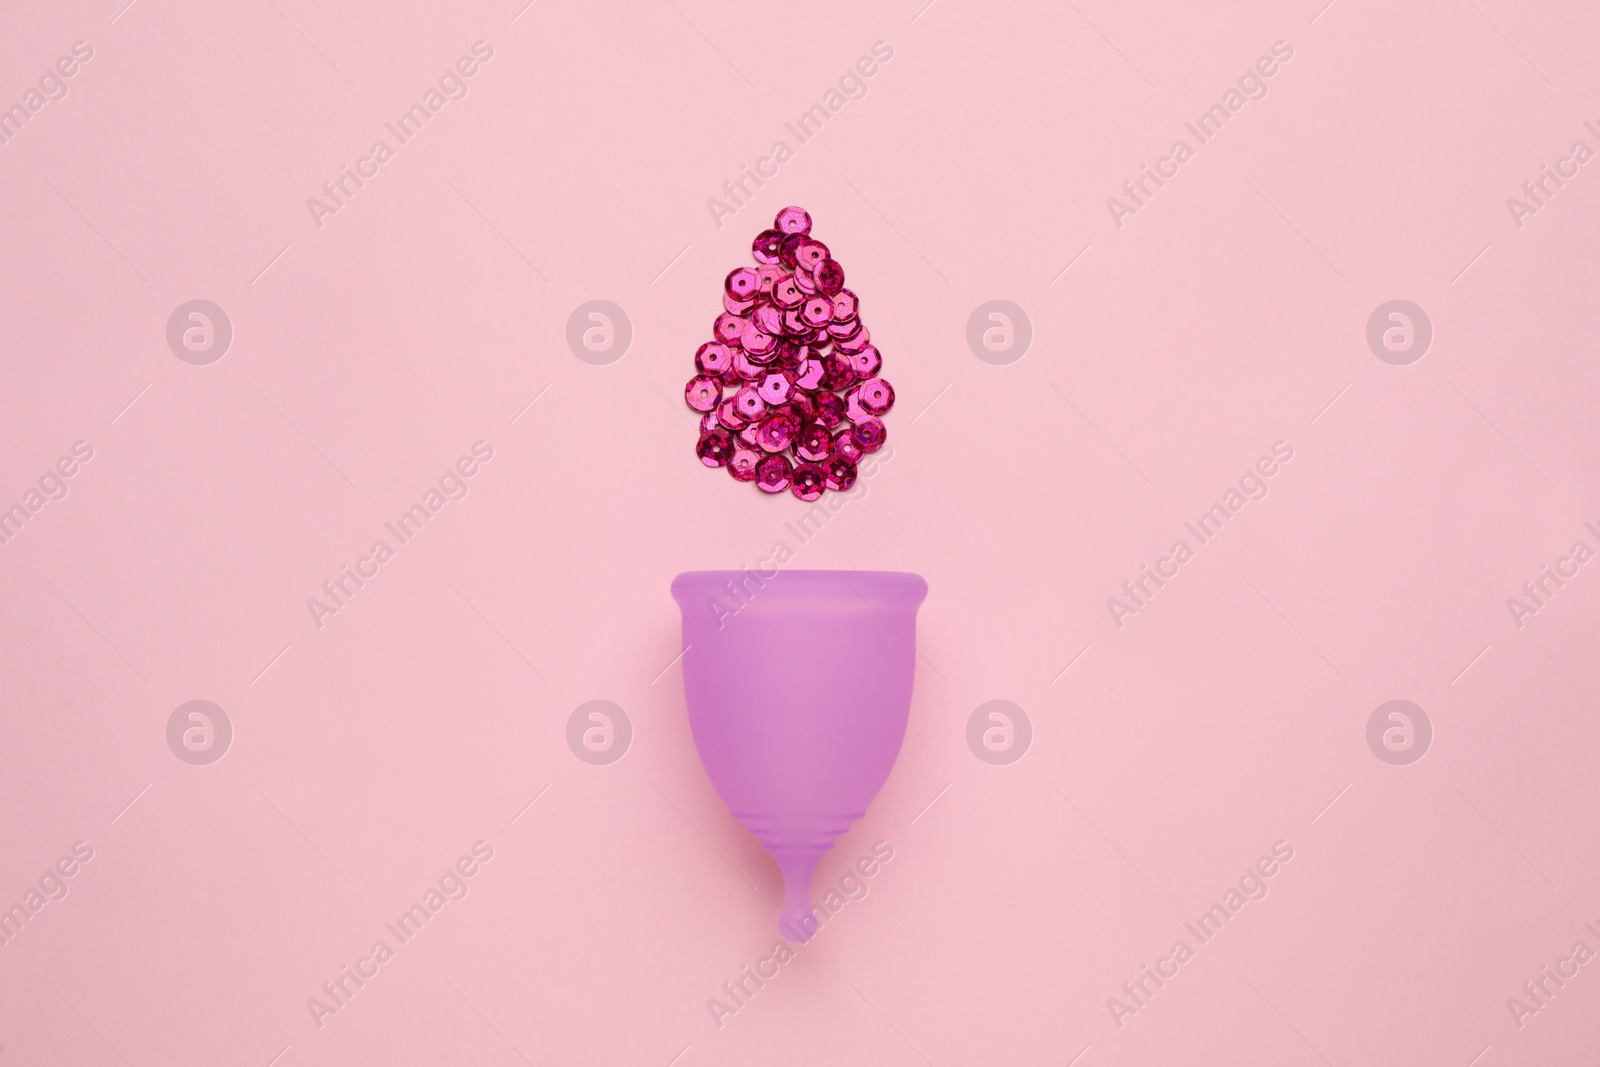 Photo of Menstrual cup near drop made of sequins on pink background, flat lay